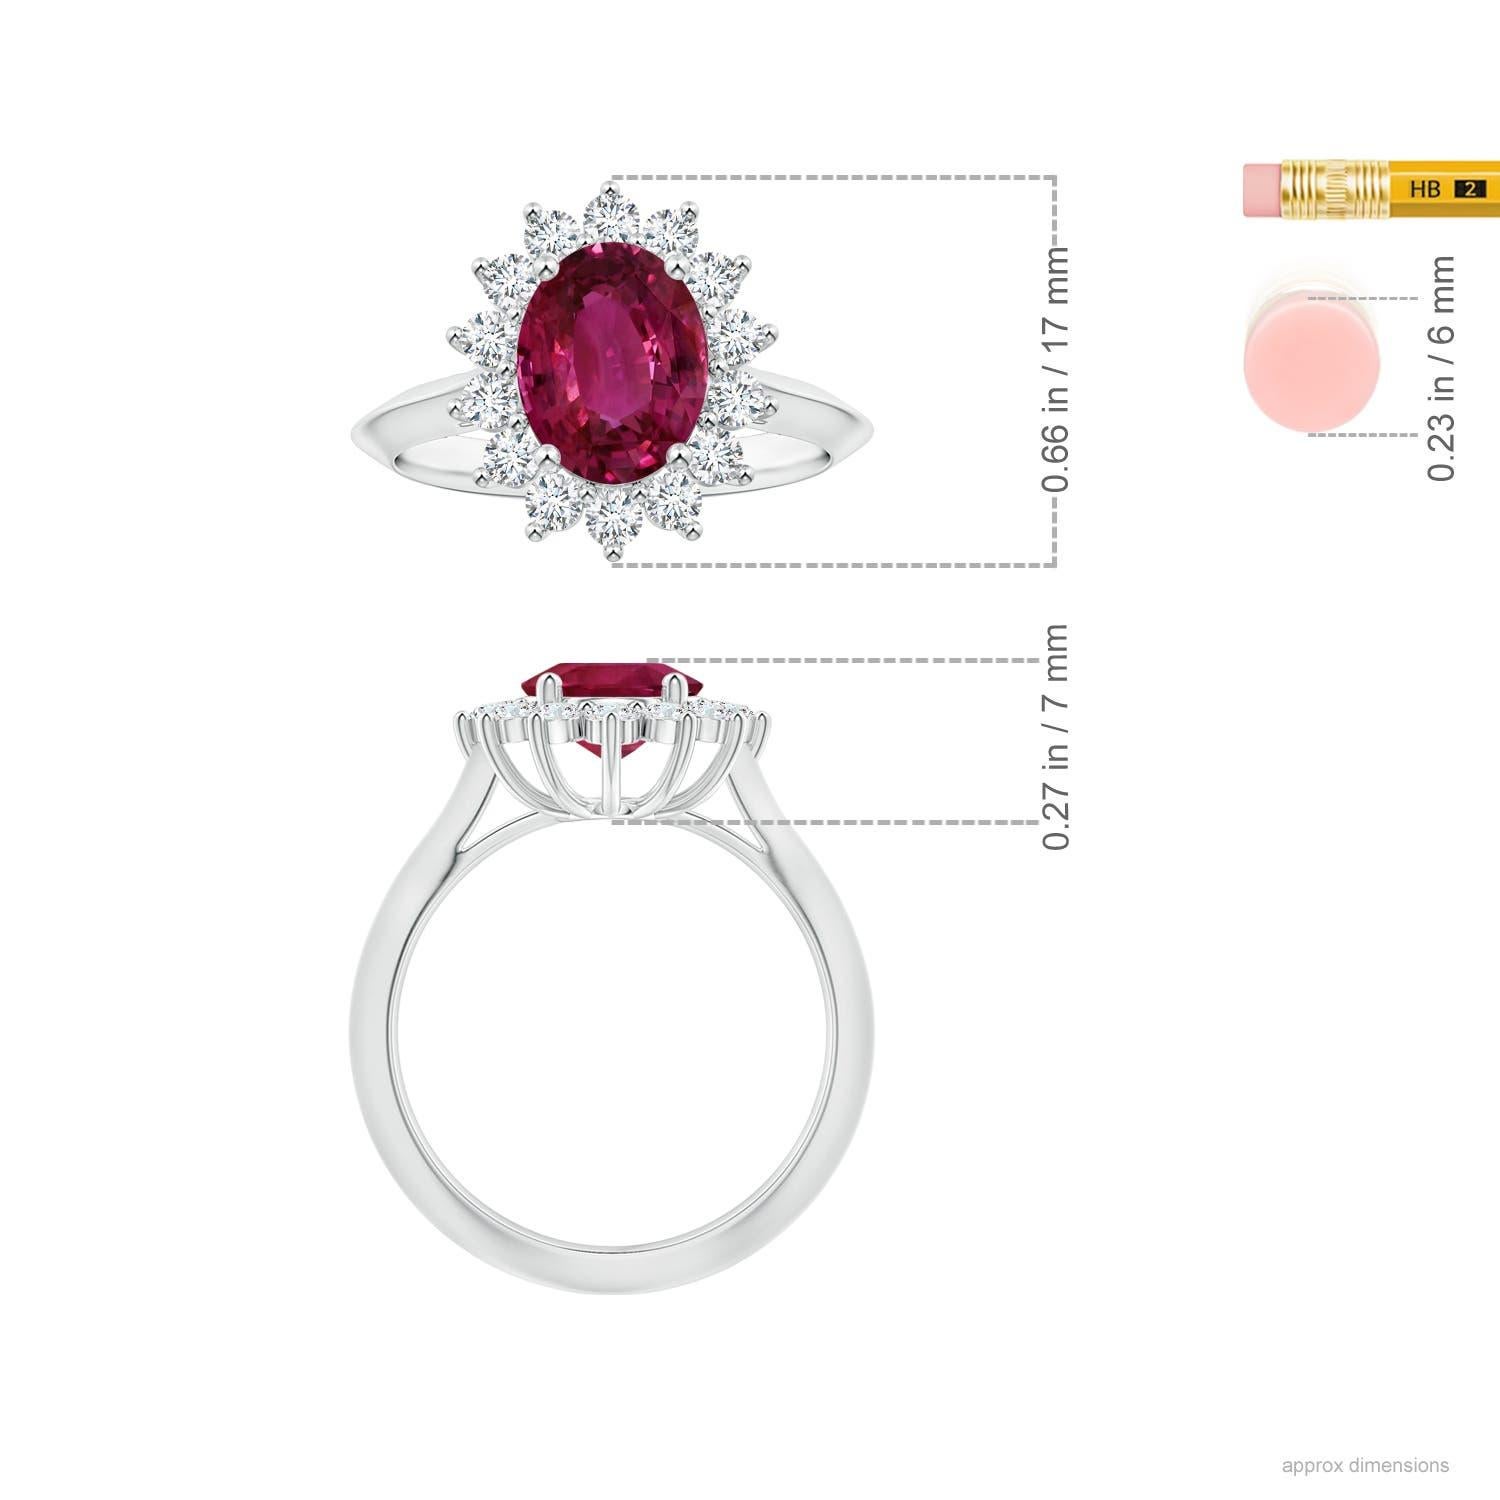 For Sale:  ANGARA Princess Diana Inspired GIA Certified Pink Sapphire Ring in White Gold 5